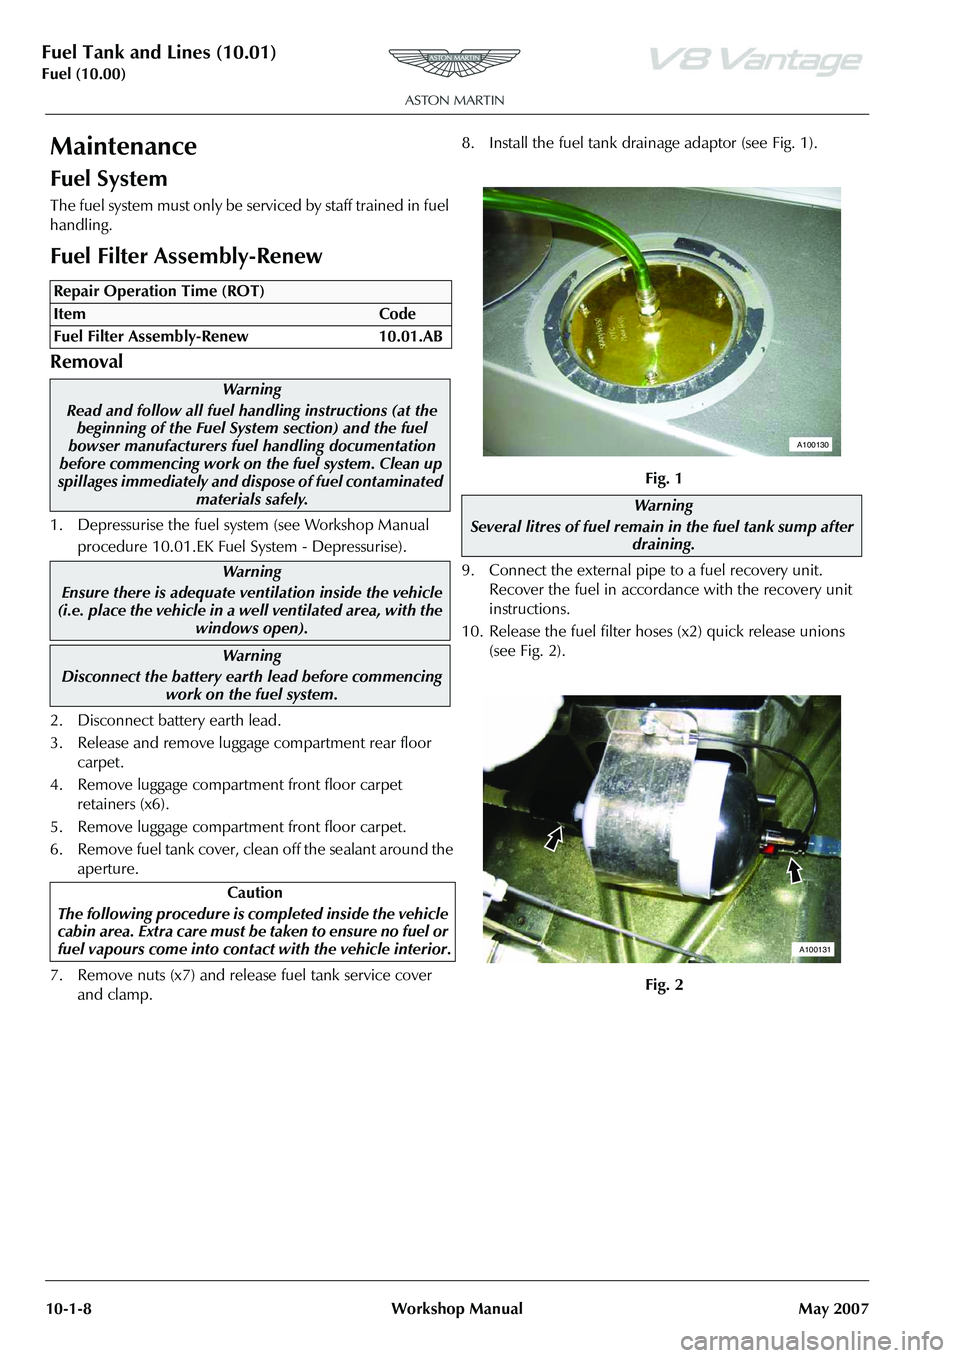 ASTON MARTIN V8 VANTAGE 2010  Workshop Manual Fuel Tank and Lines (10.01)
Fuel (10.00)10-1-8 Workshop Manual May 2007
Maintenance
Fuel System
The fuel system must only be serviced by staff trained in fuel 
handling.
Fuel Filter Assembly-Renew
Rem